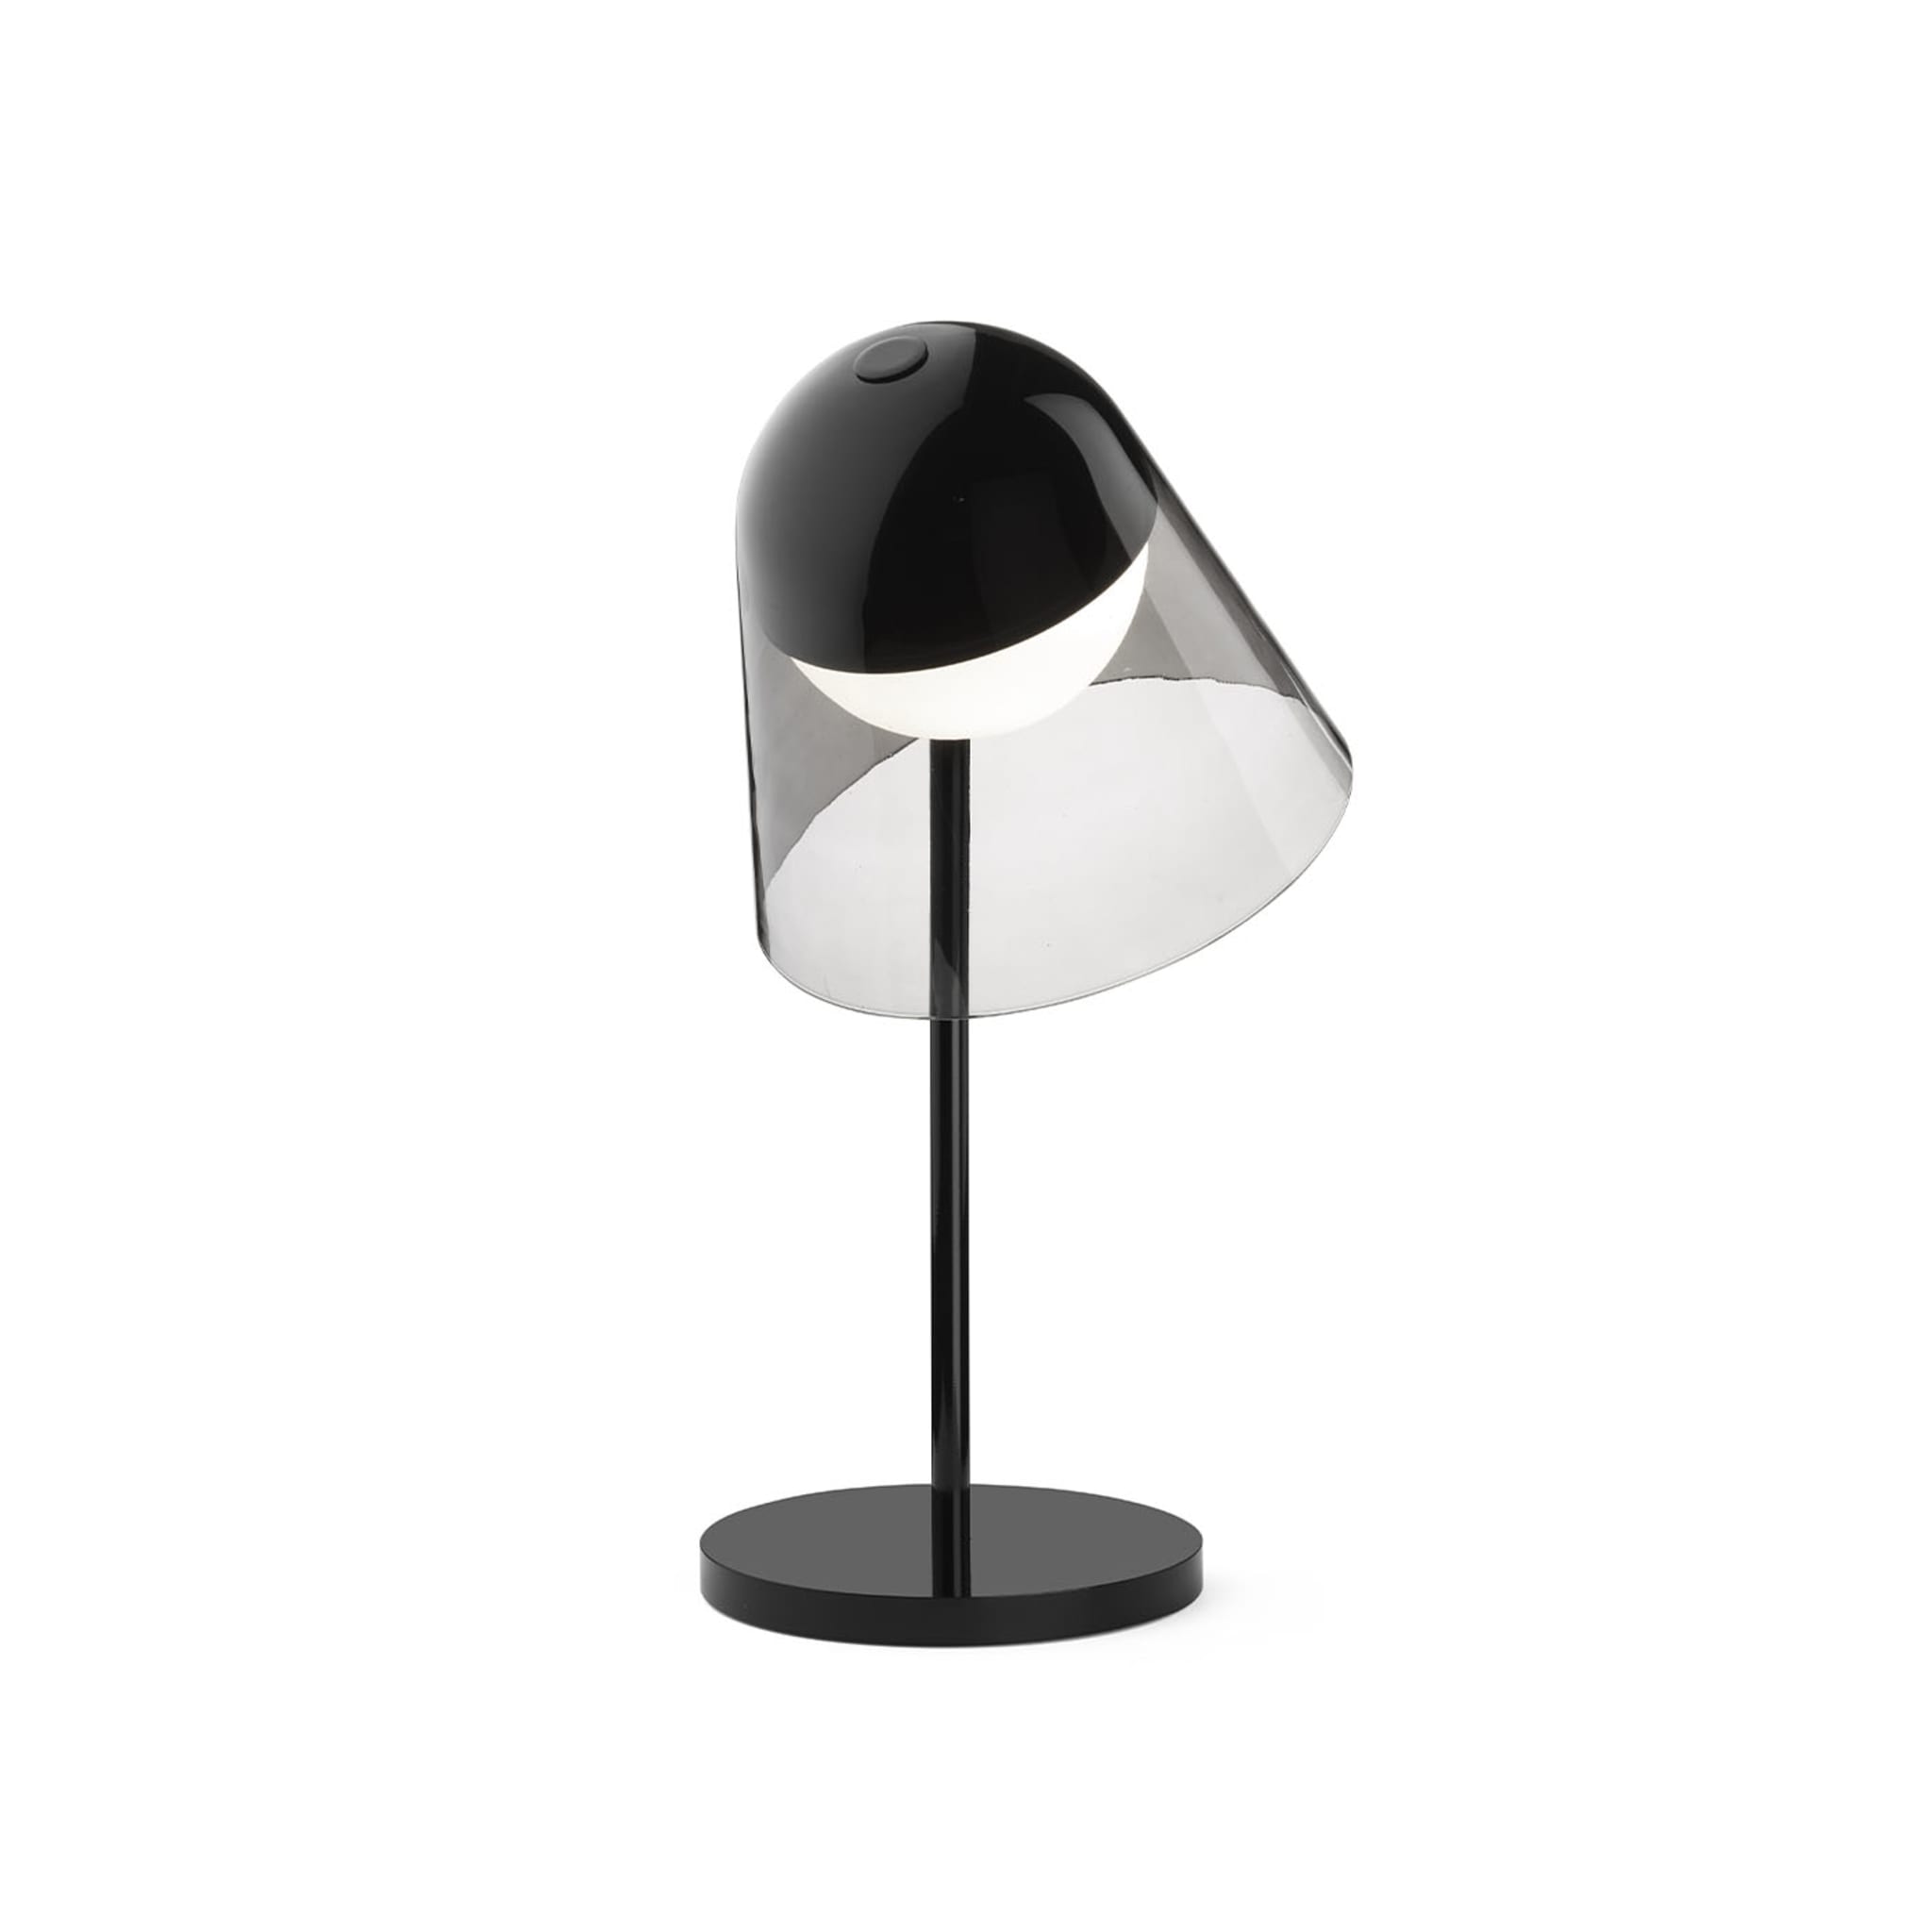 Helios Table Lamp by Branch Creative - Alternative view 3